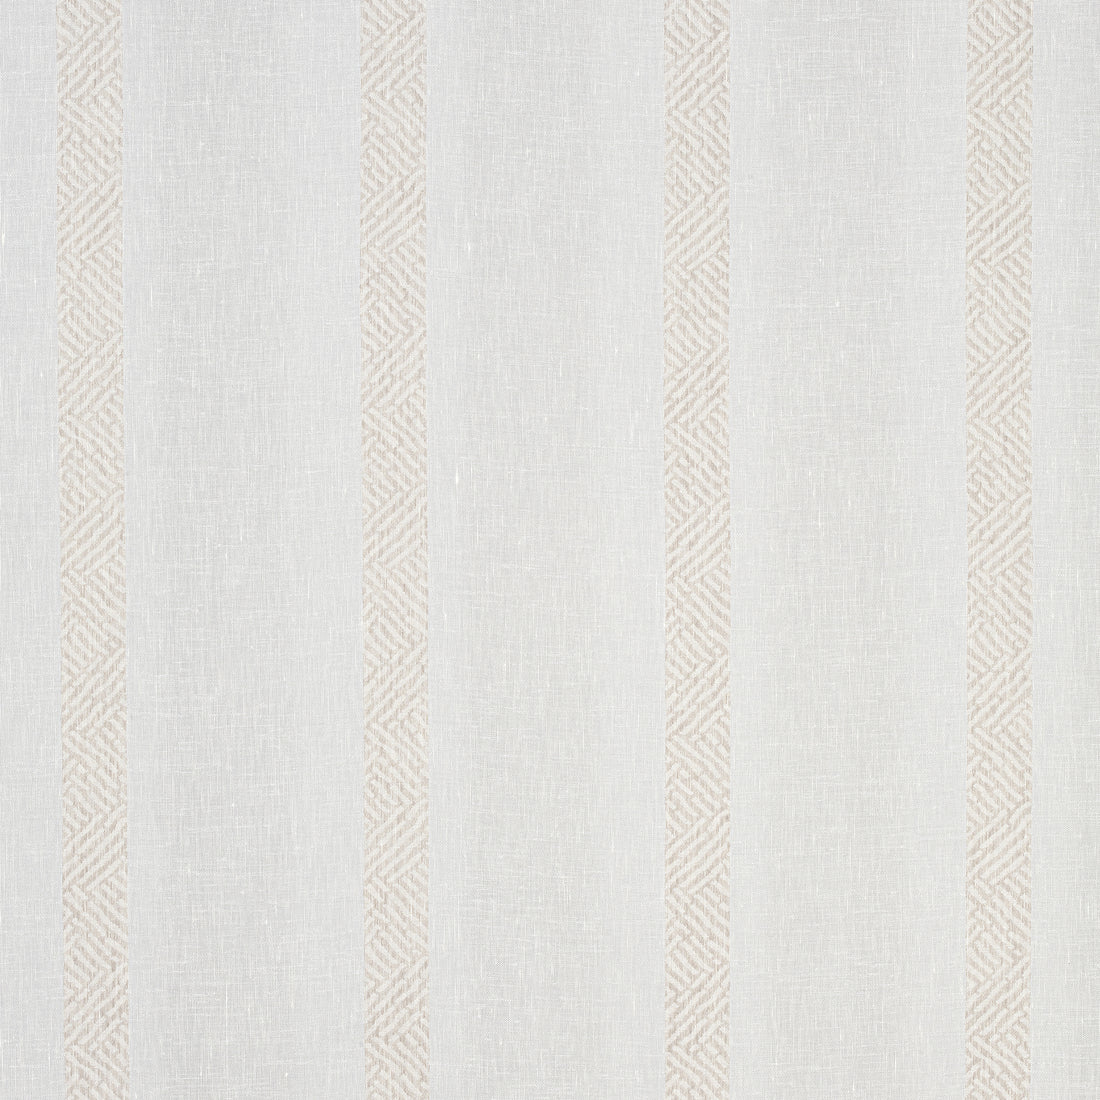 Cobble Hill Stripe fabric in champagne color - pattern number FWW7124 - by Thibaut in the Atmosphere collection